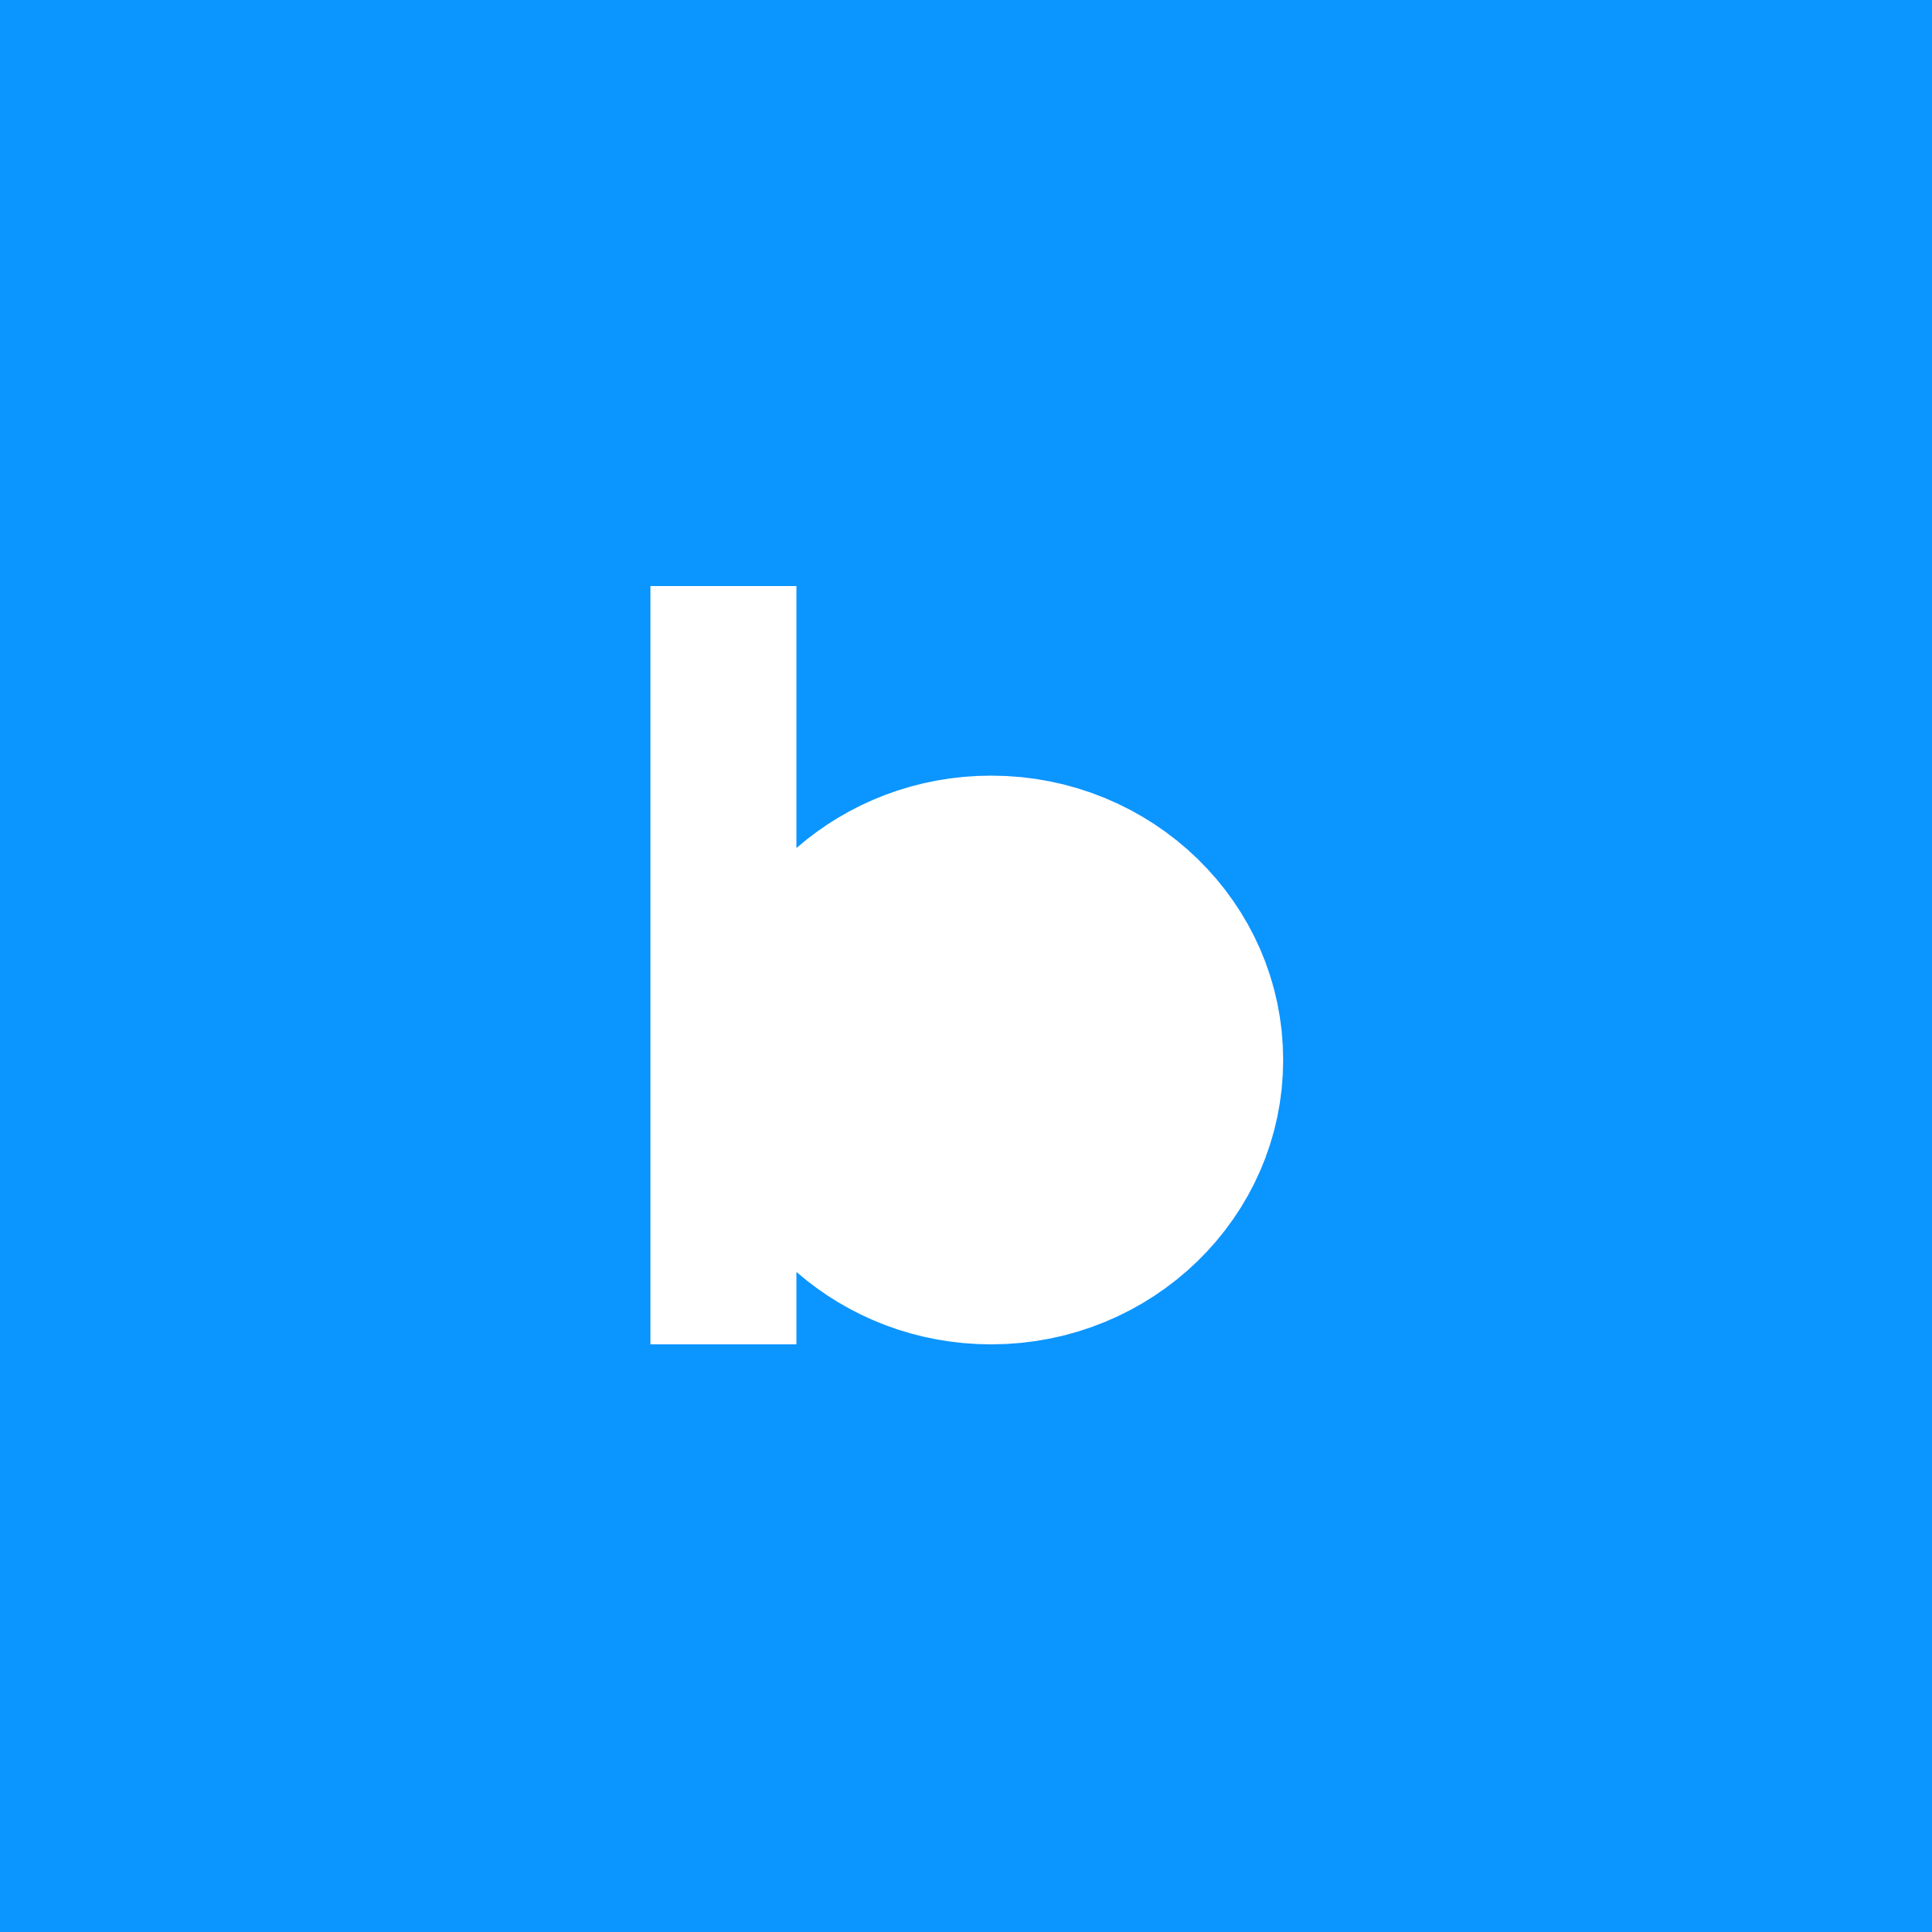 Beatsource: Music streaming service for DJs who play everything